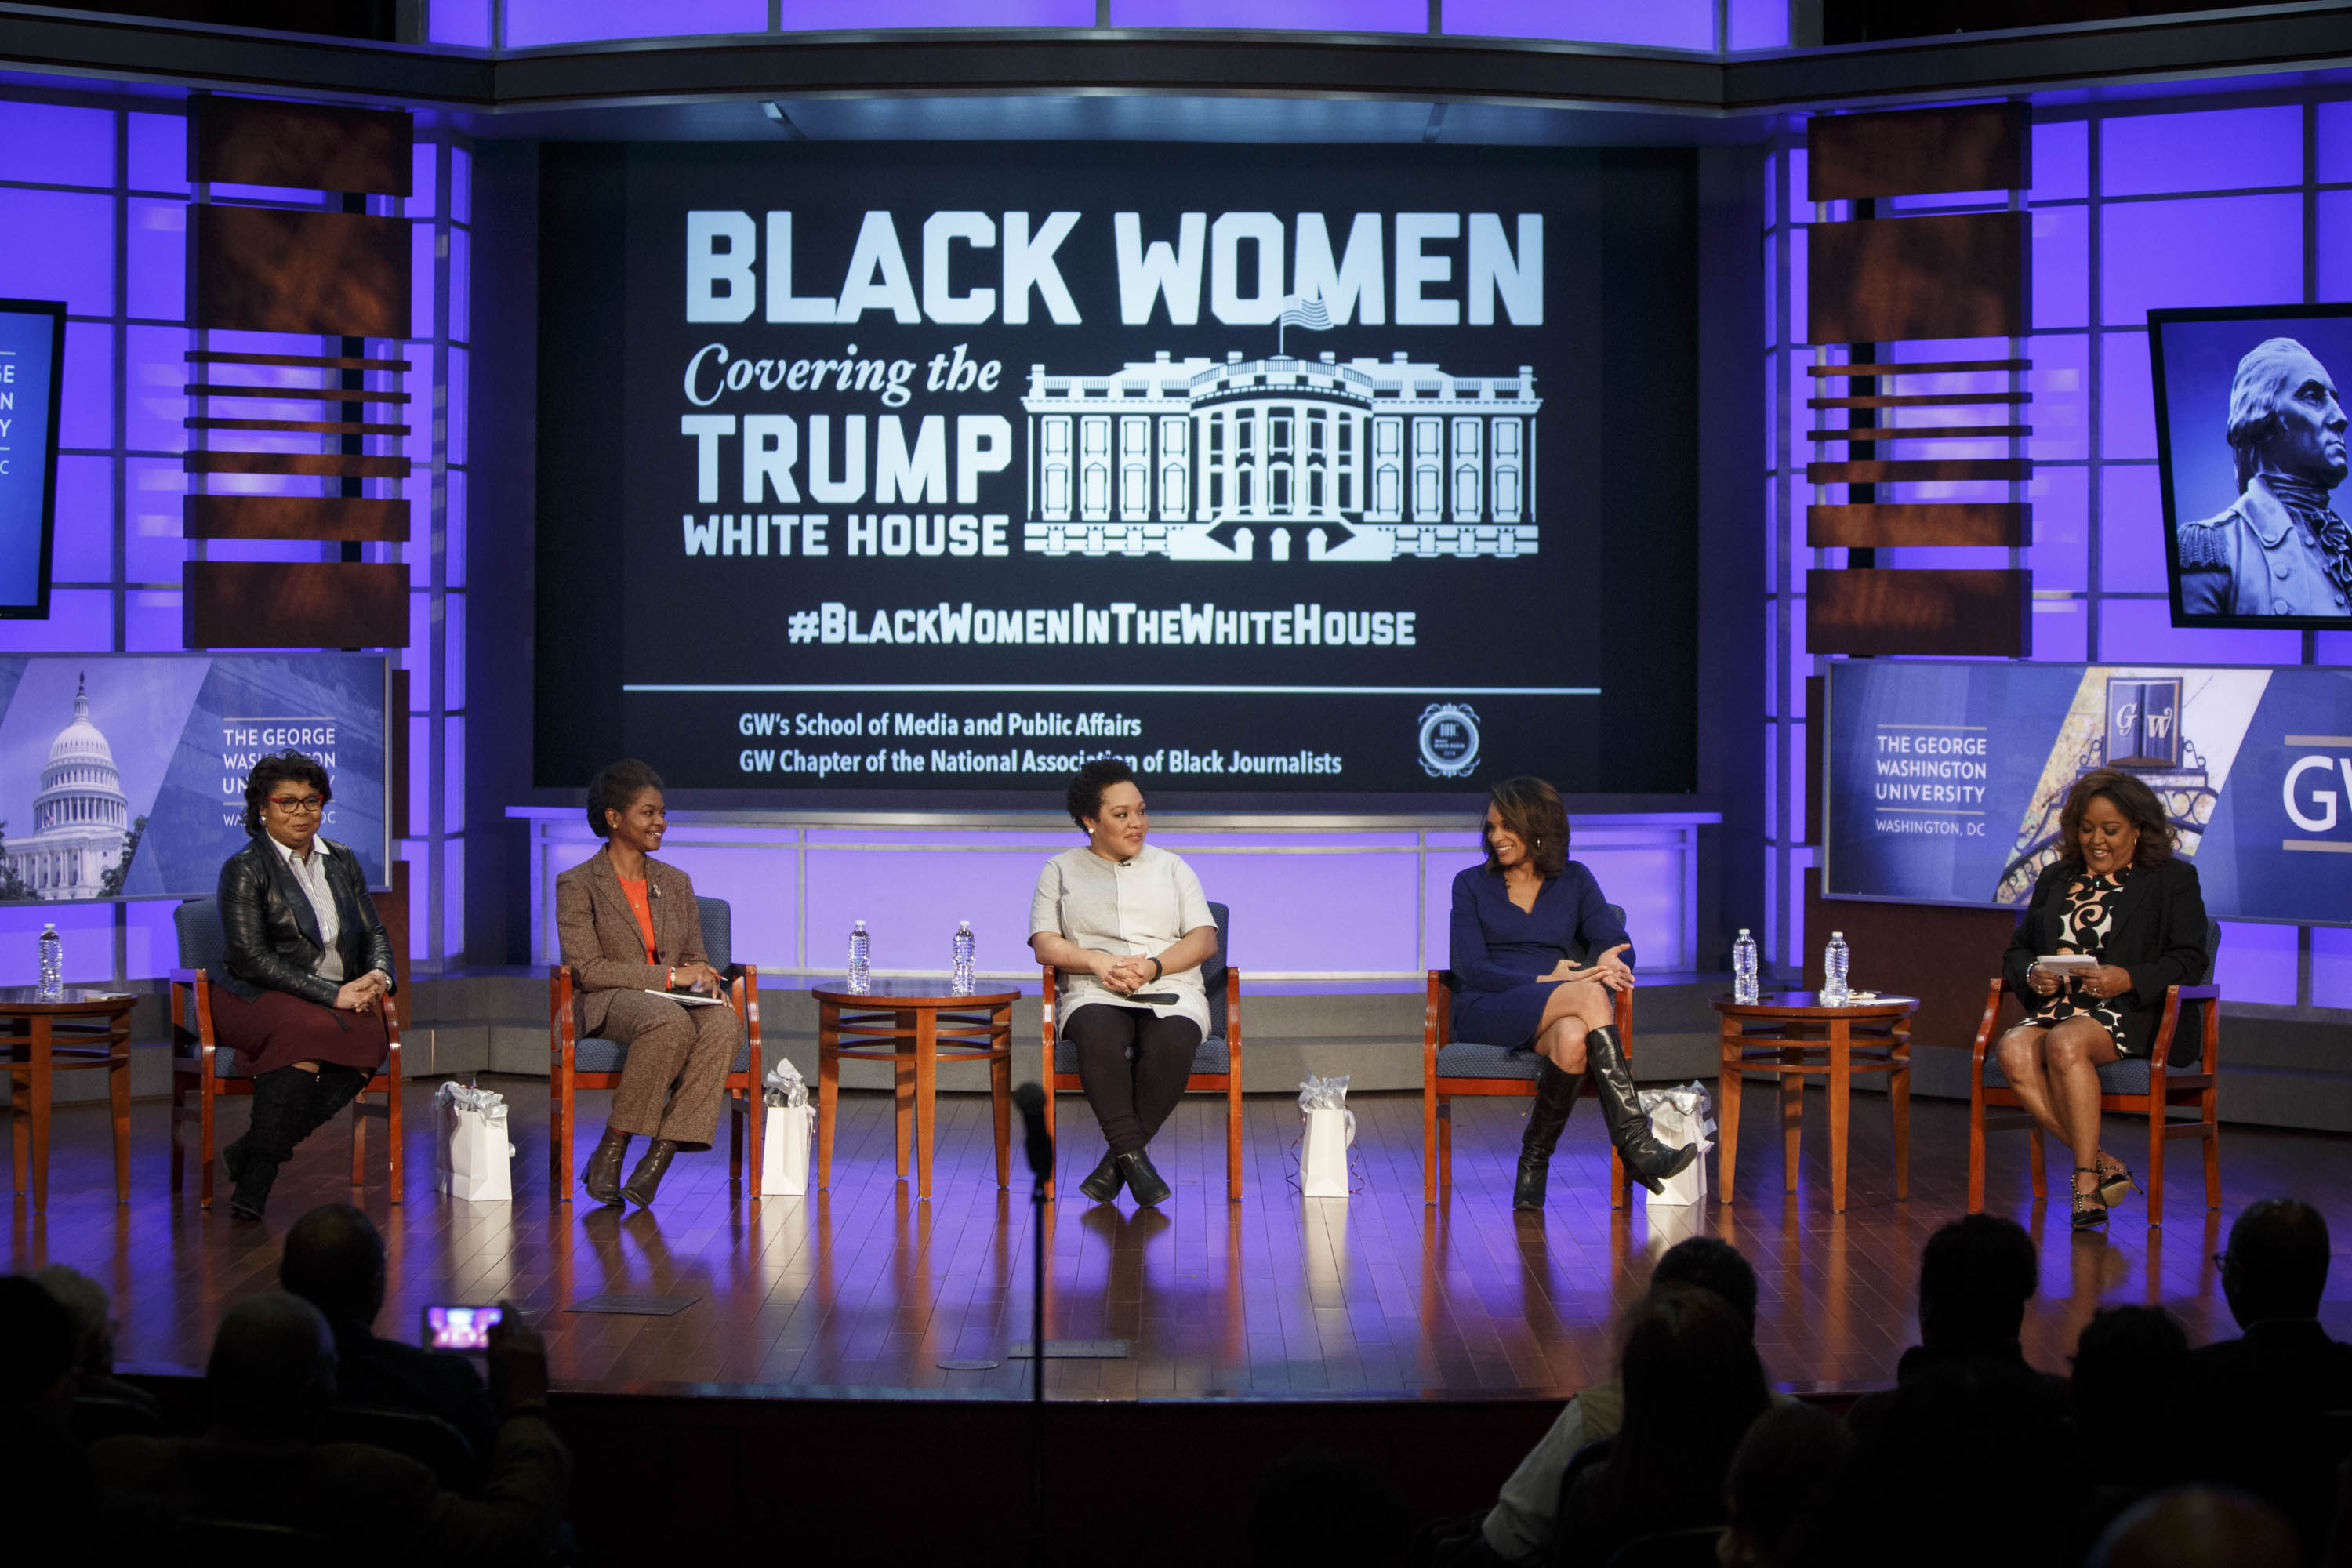 "Black Women Covering the White House" on screen with panelists seated on stage in front of screen